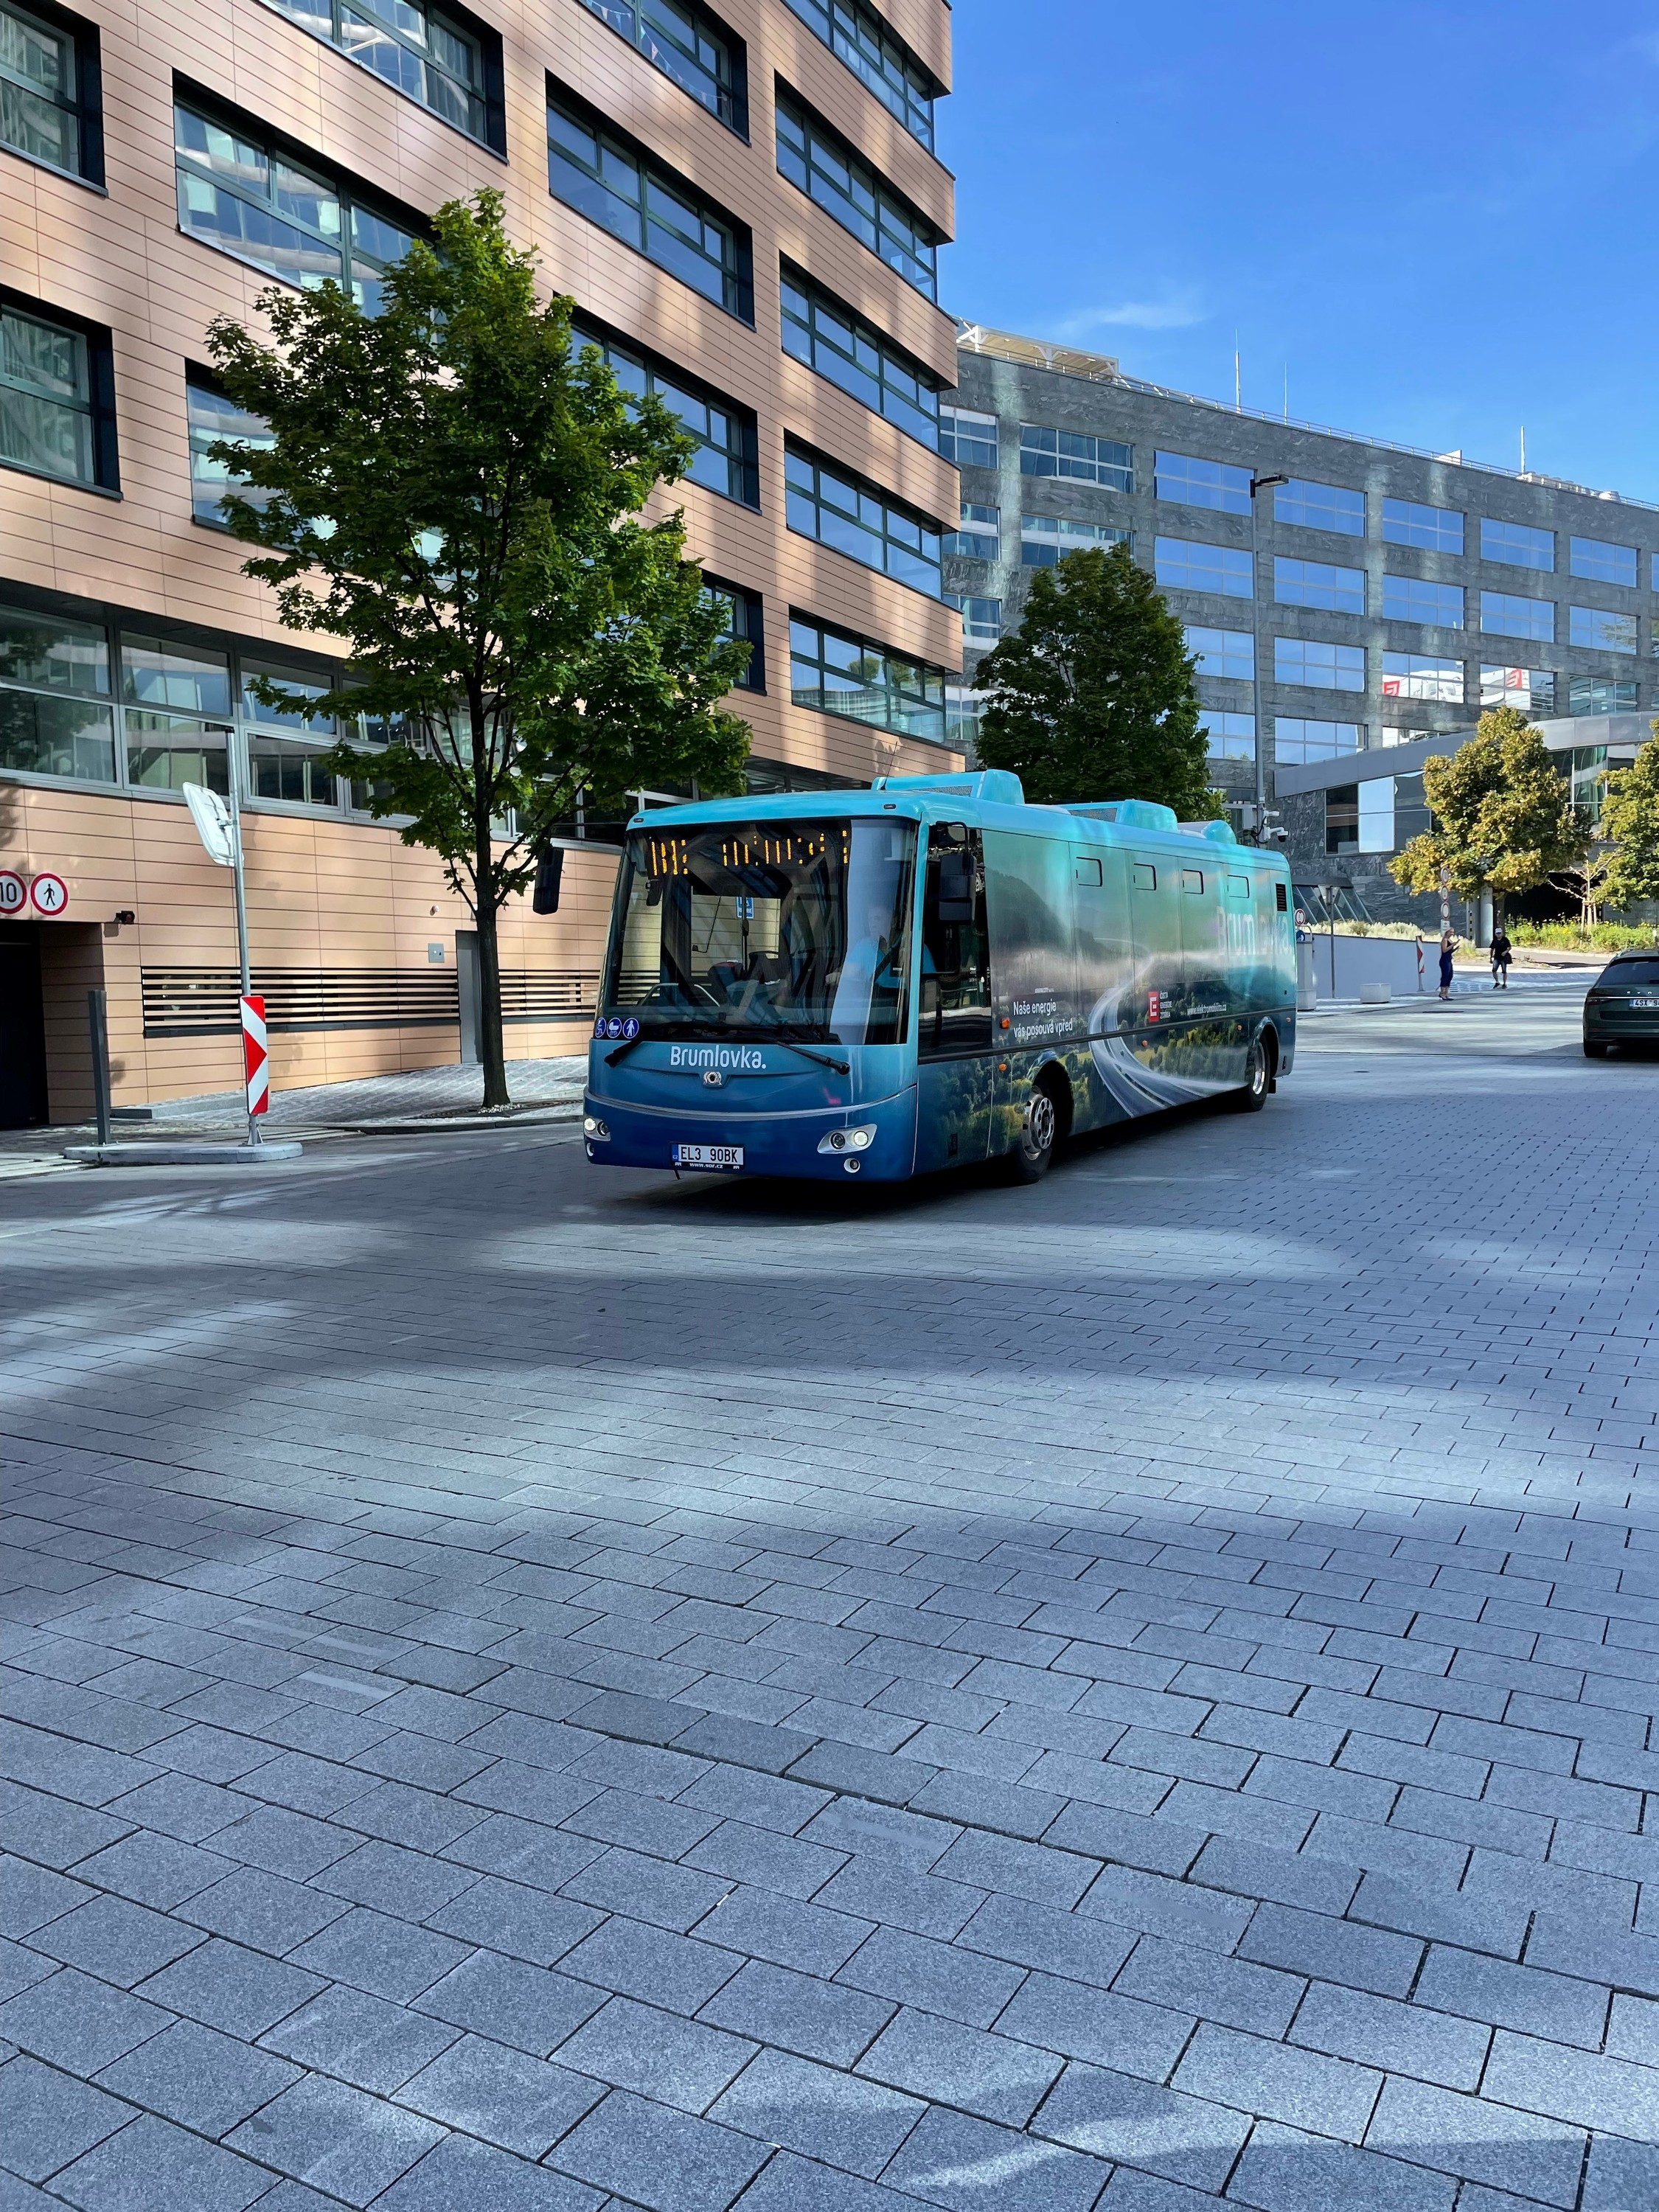 Prague’s Brumlovka has the first 100% electric fleet of buses in Prague. Over seven years, the free routes have circumnavigated the world eight times and carried more than 2.5 million passengers